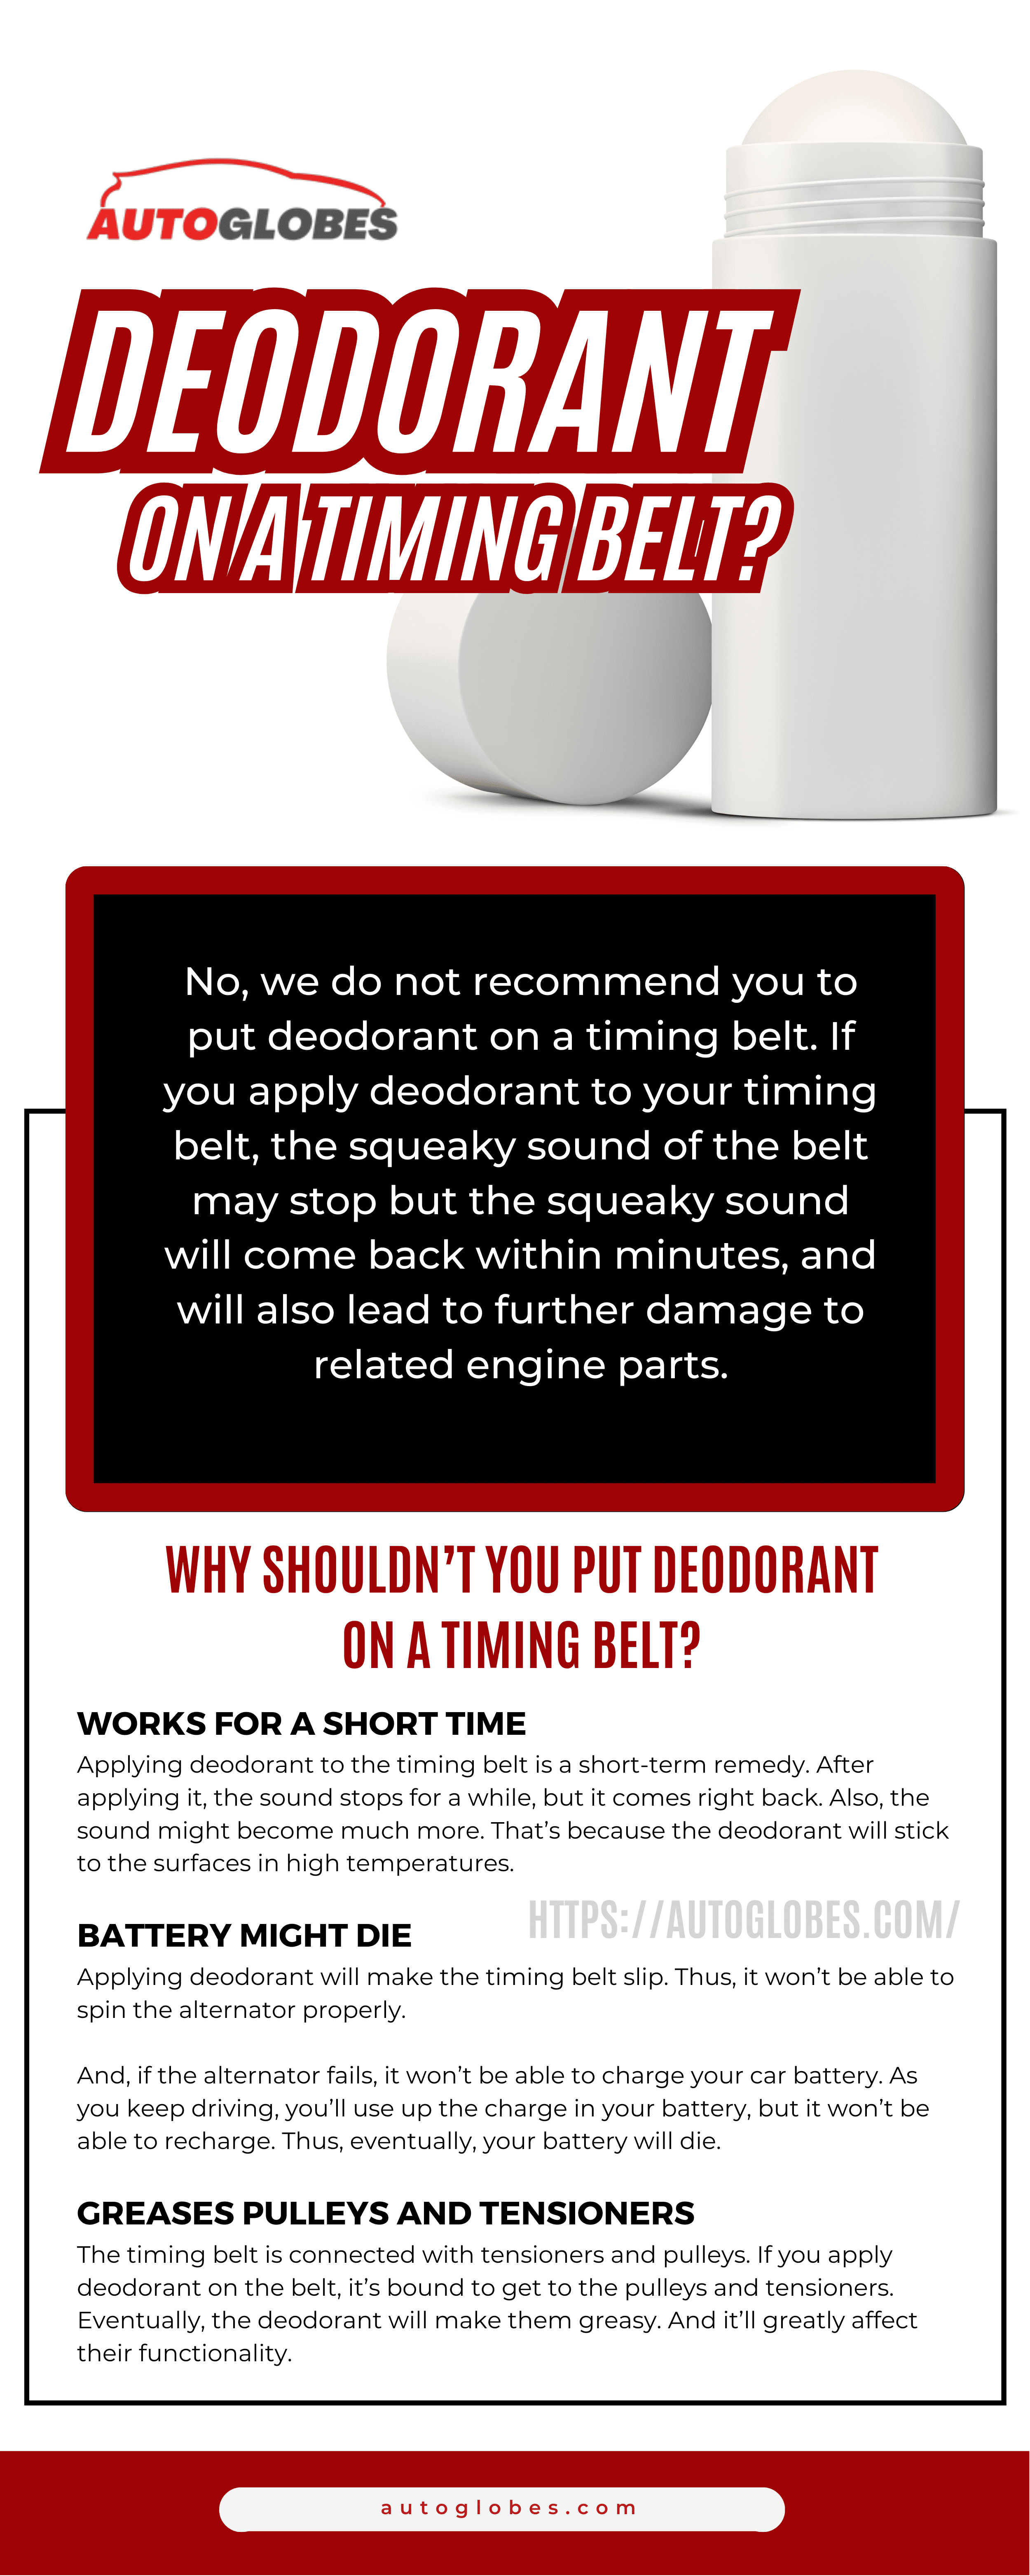 Reasons: Why Shouldn’t You Put Deodorant on a Timing Belt? Infographic